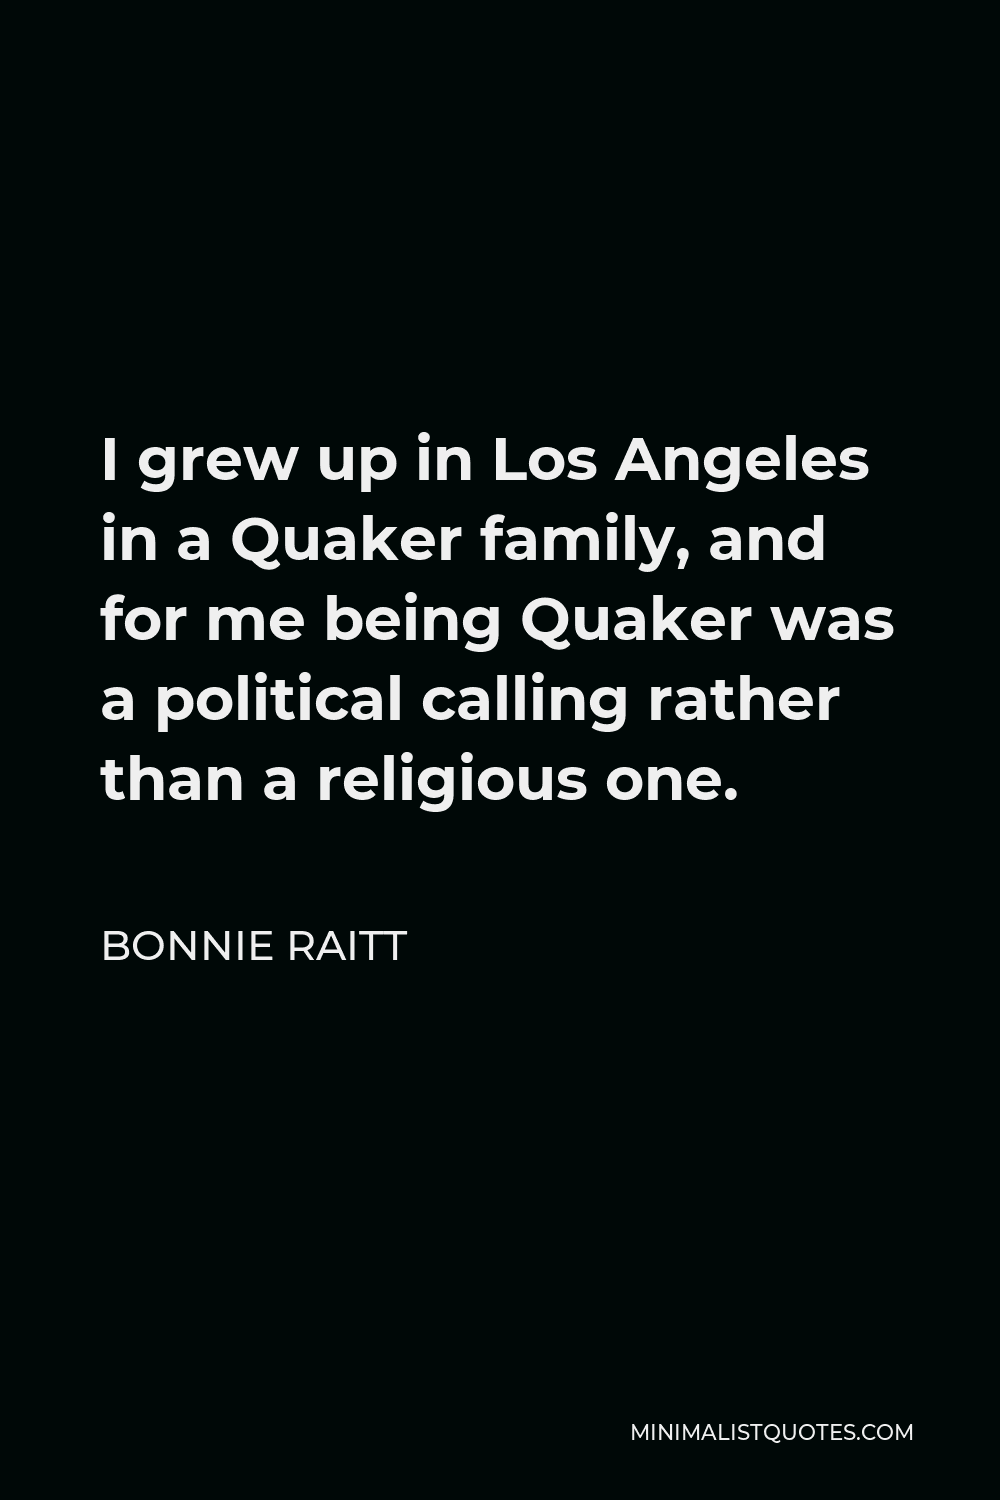 Bonnie Raitt Quote - I grew up in Los Angeles in a Quaker family, and for me being Quaker was a political calling rather than a religious one.